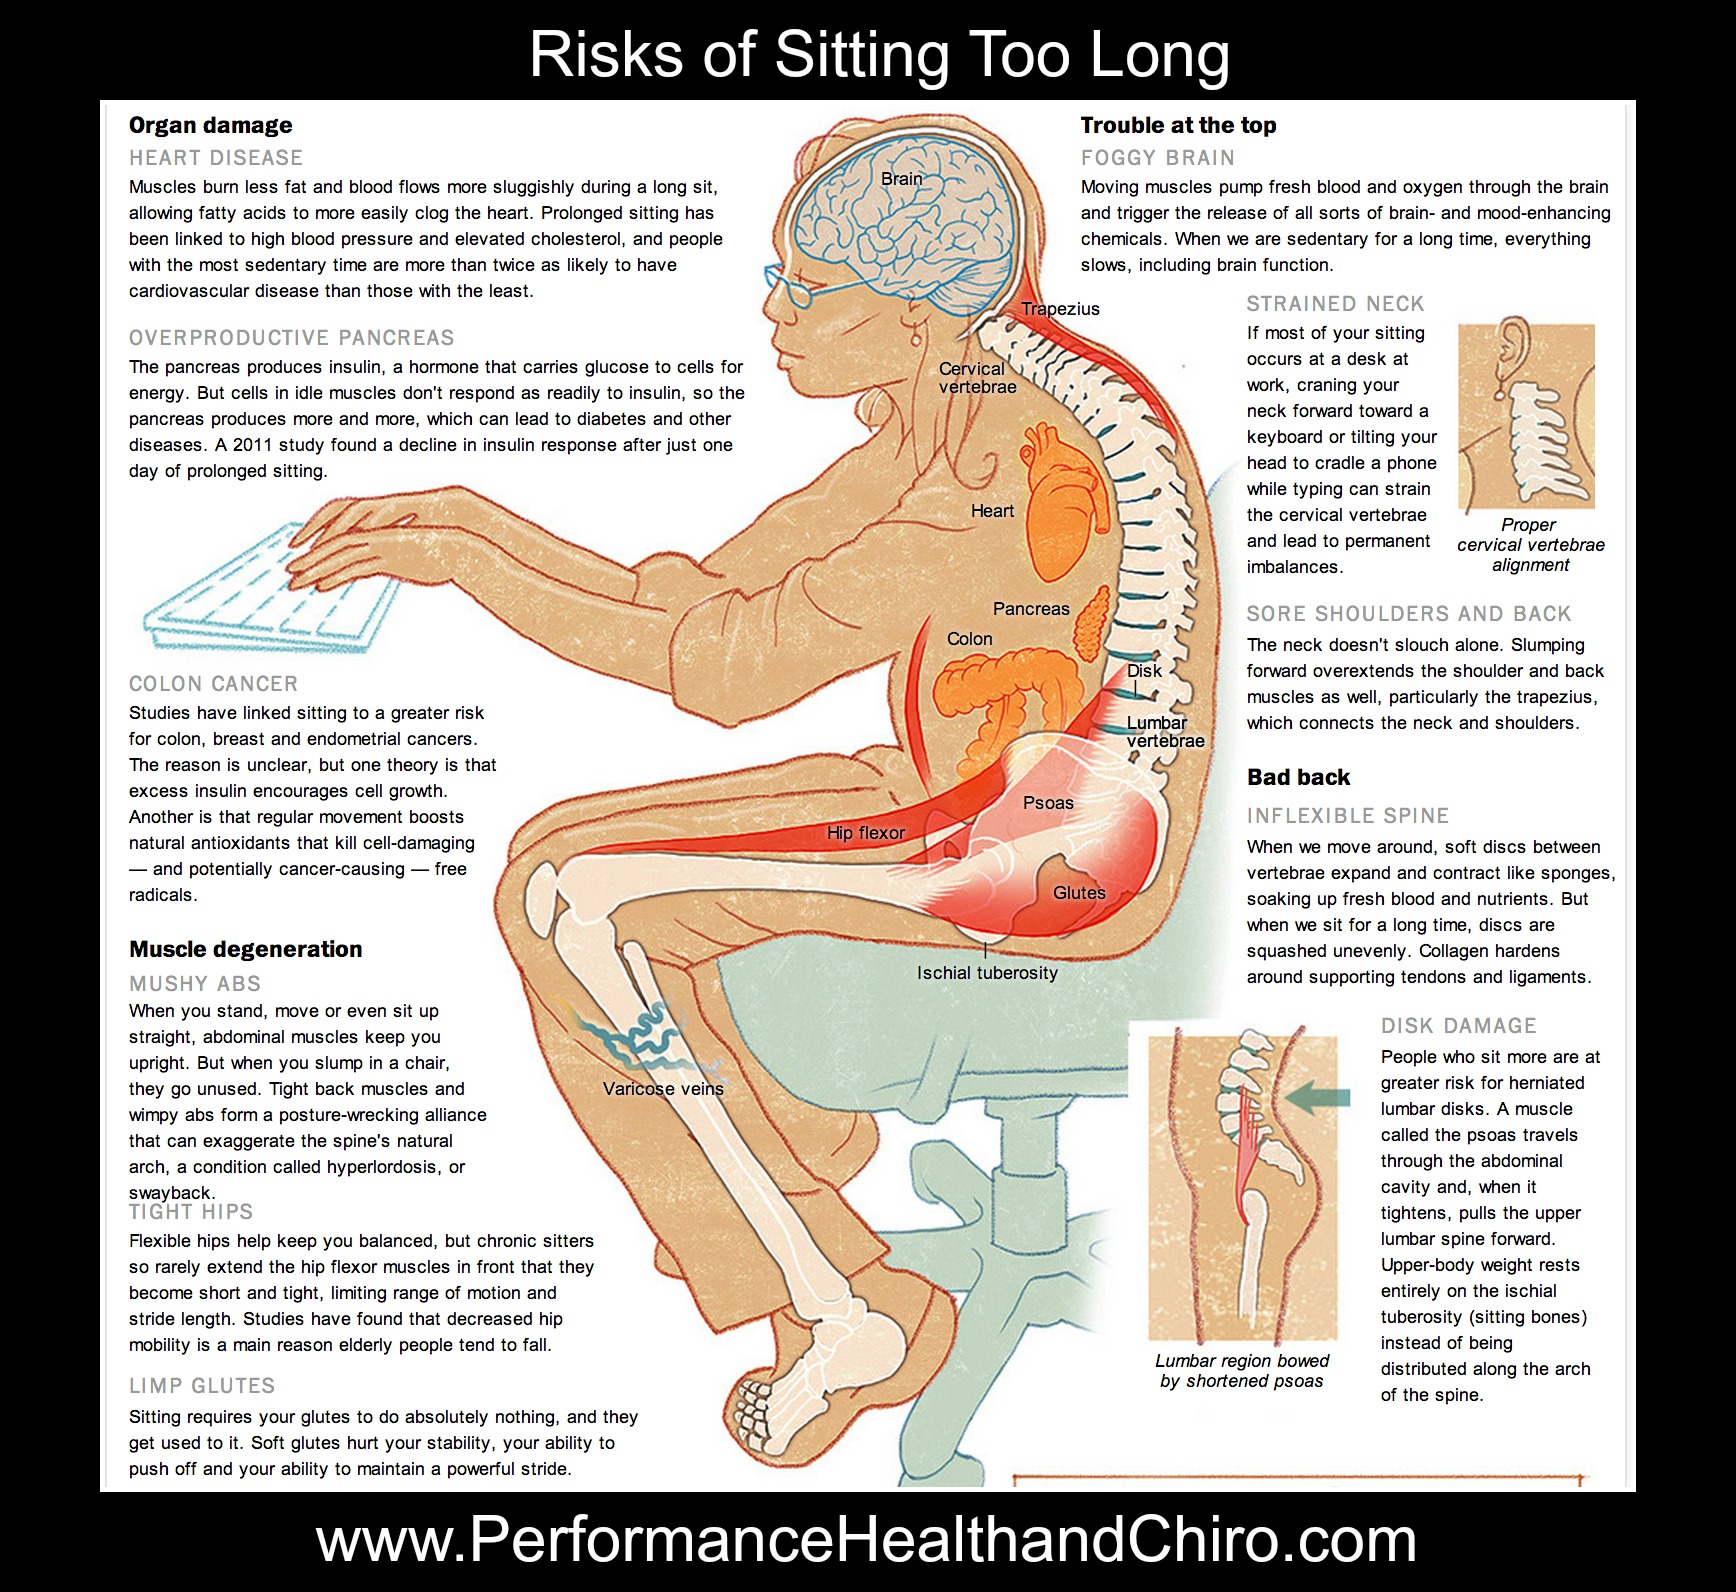 7 easy tips to stop back pain while sitting at work | hainesport, nj